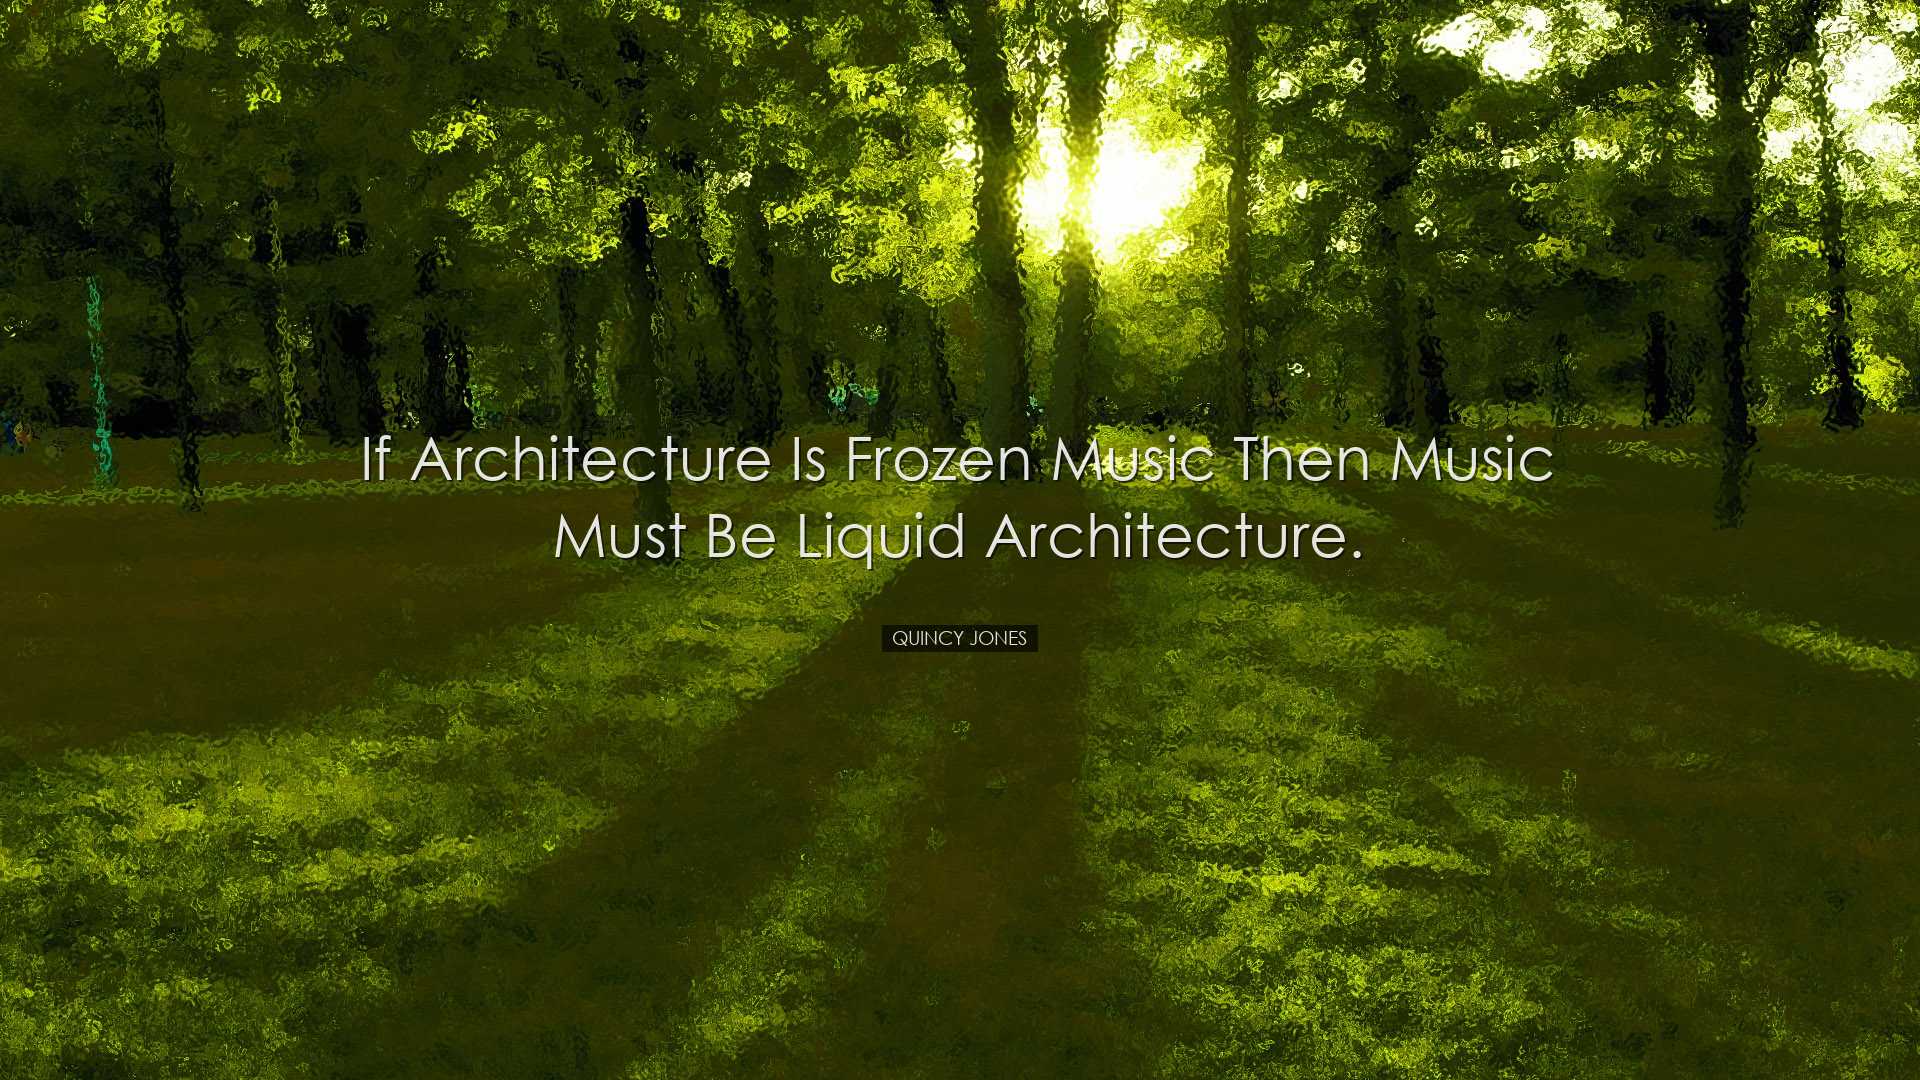 If architecture is frozen music then music must be liquid architec